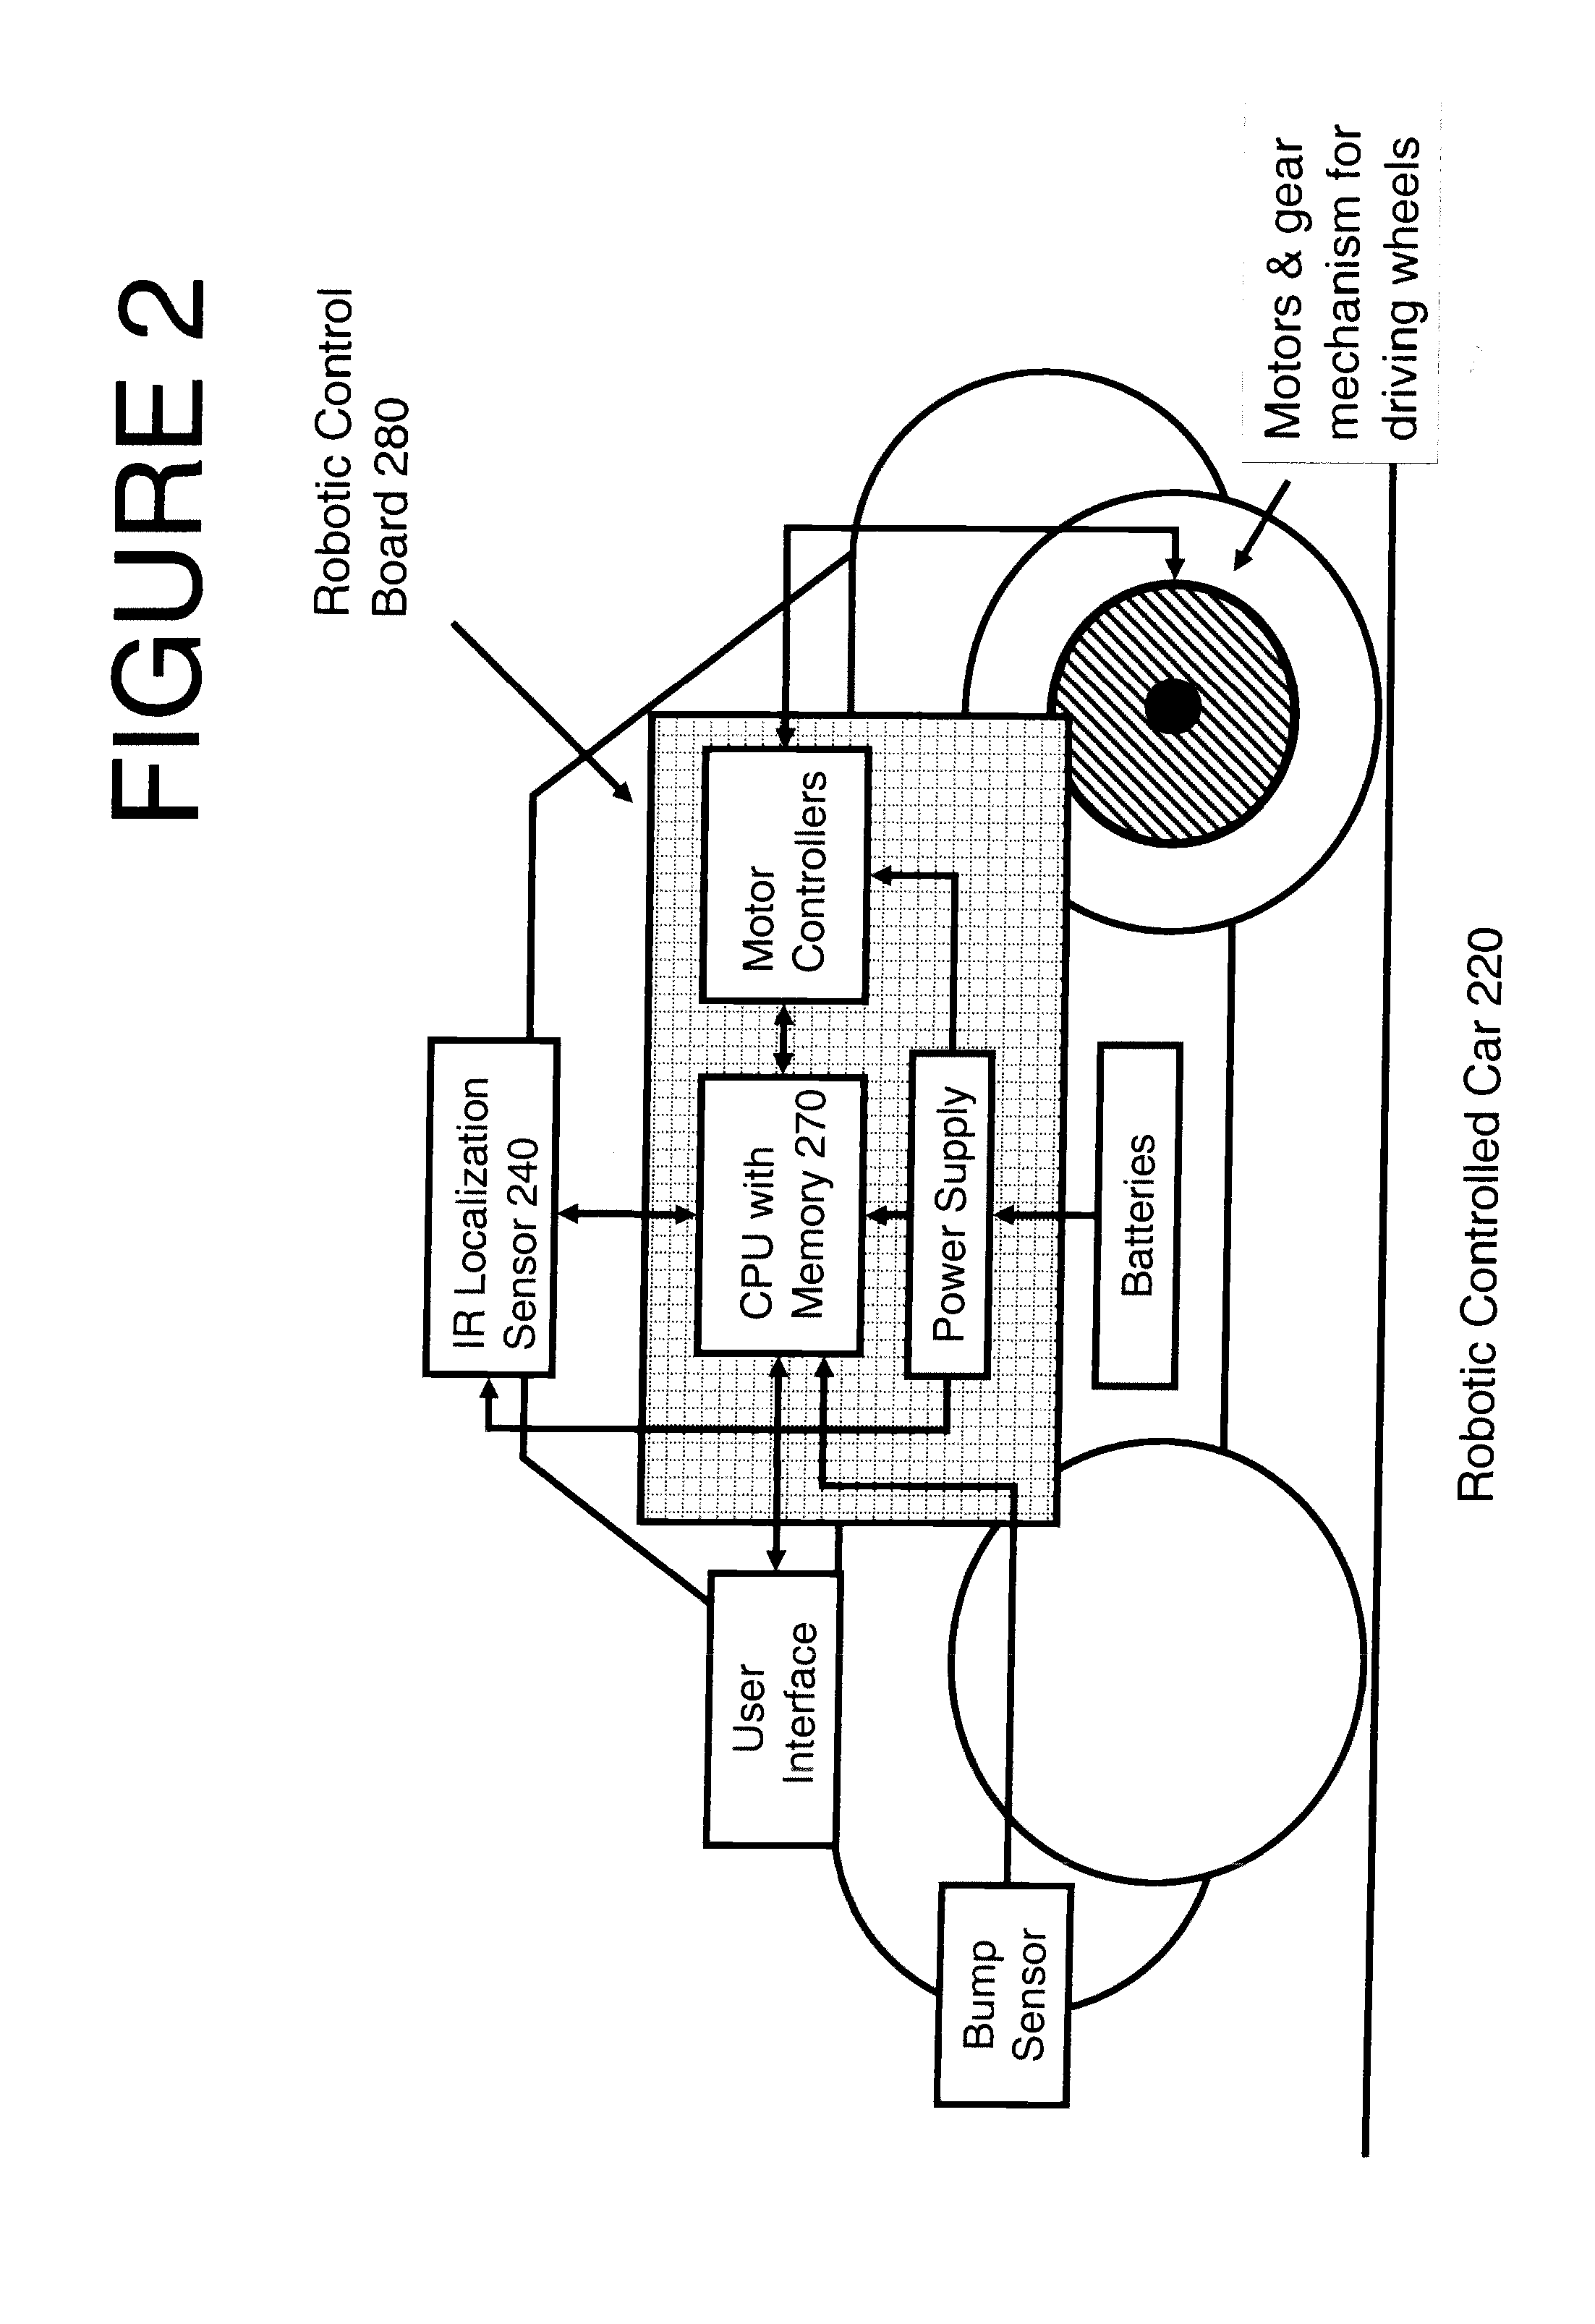 Robotic game systems and methods